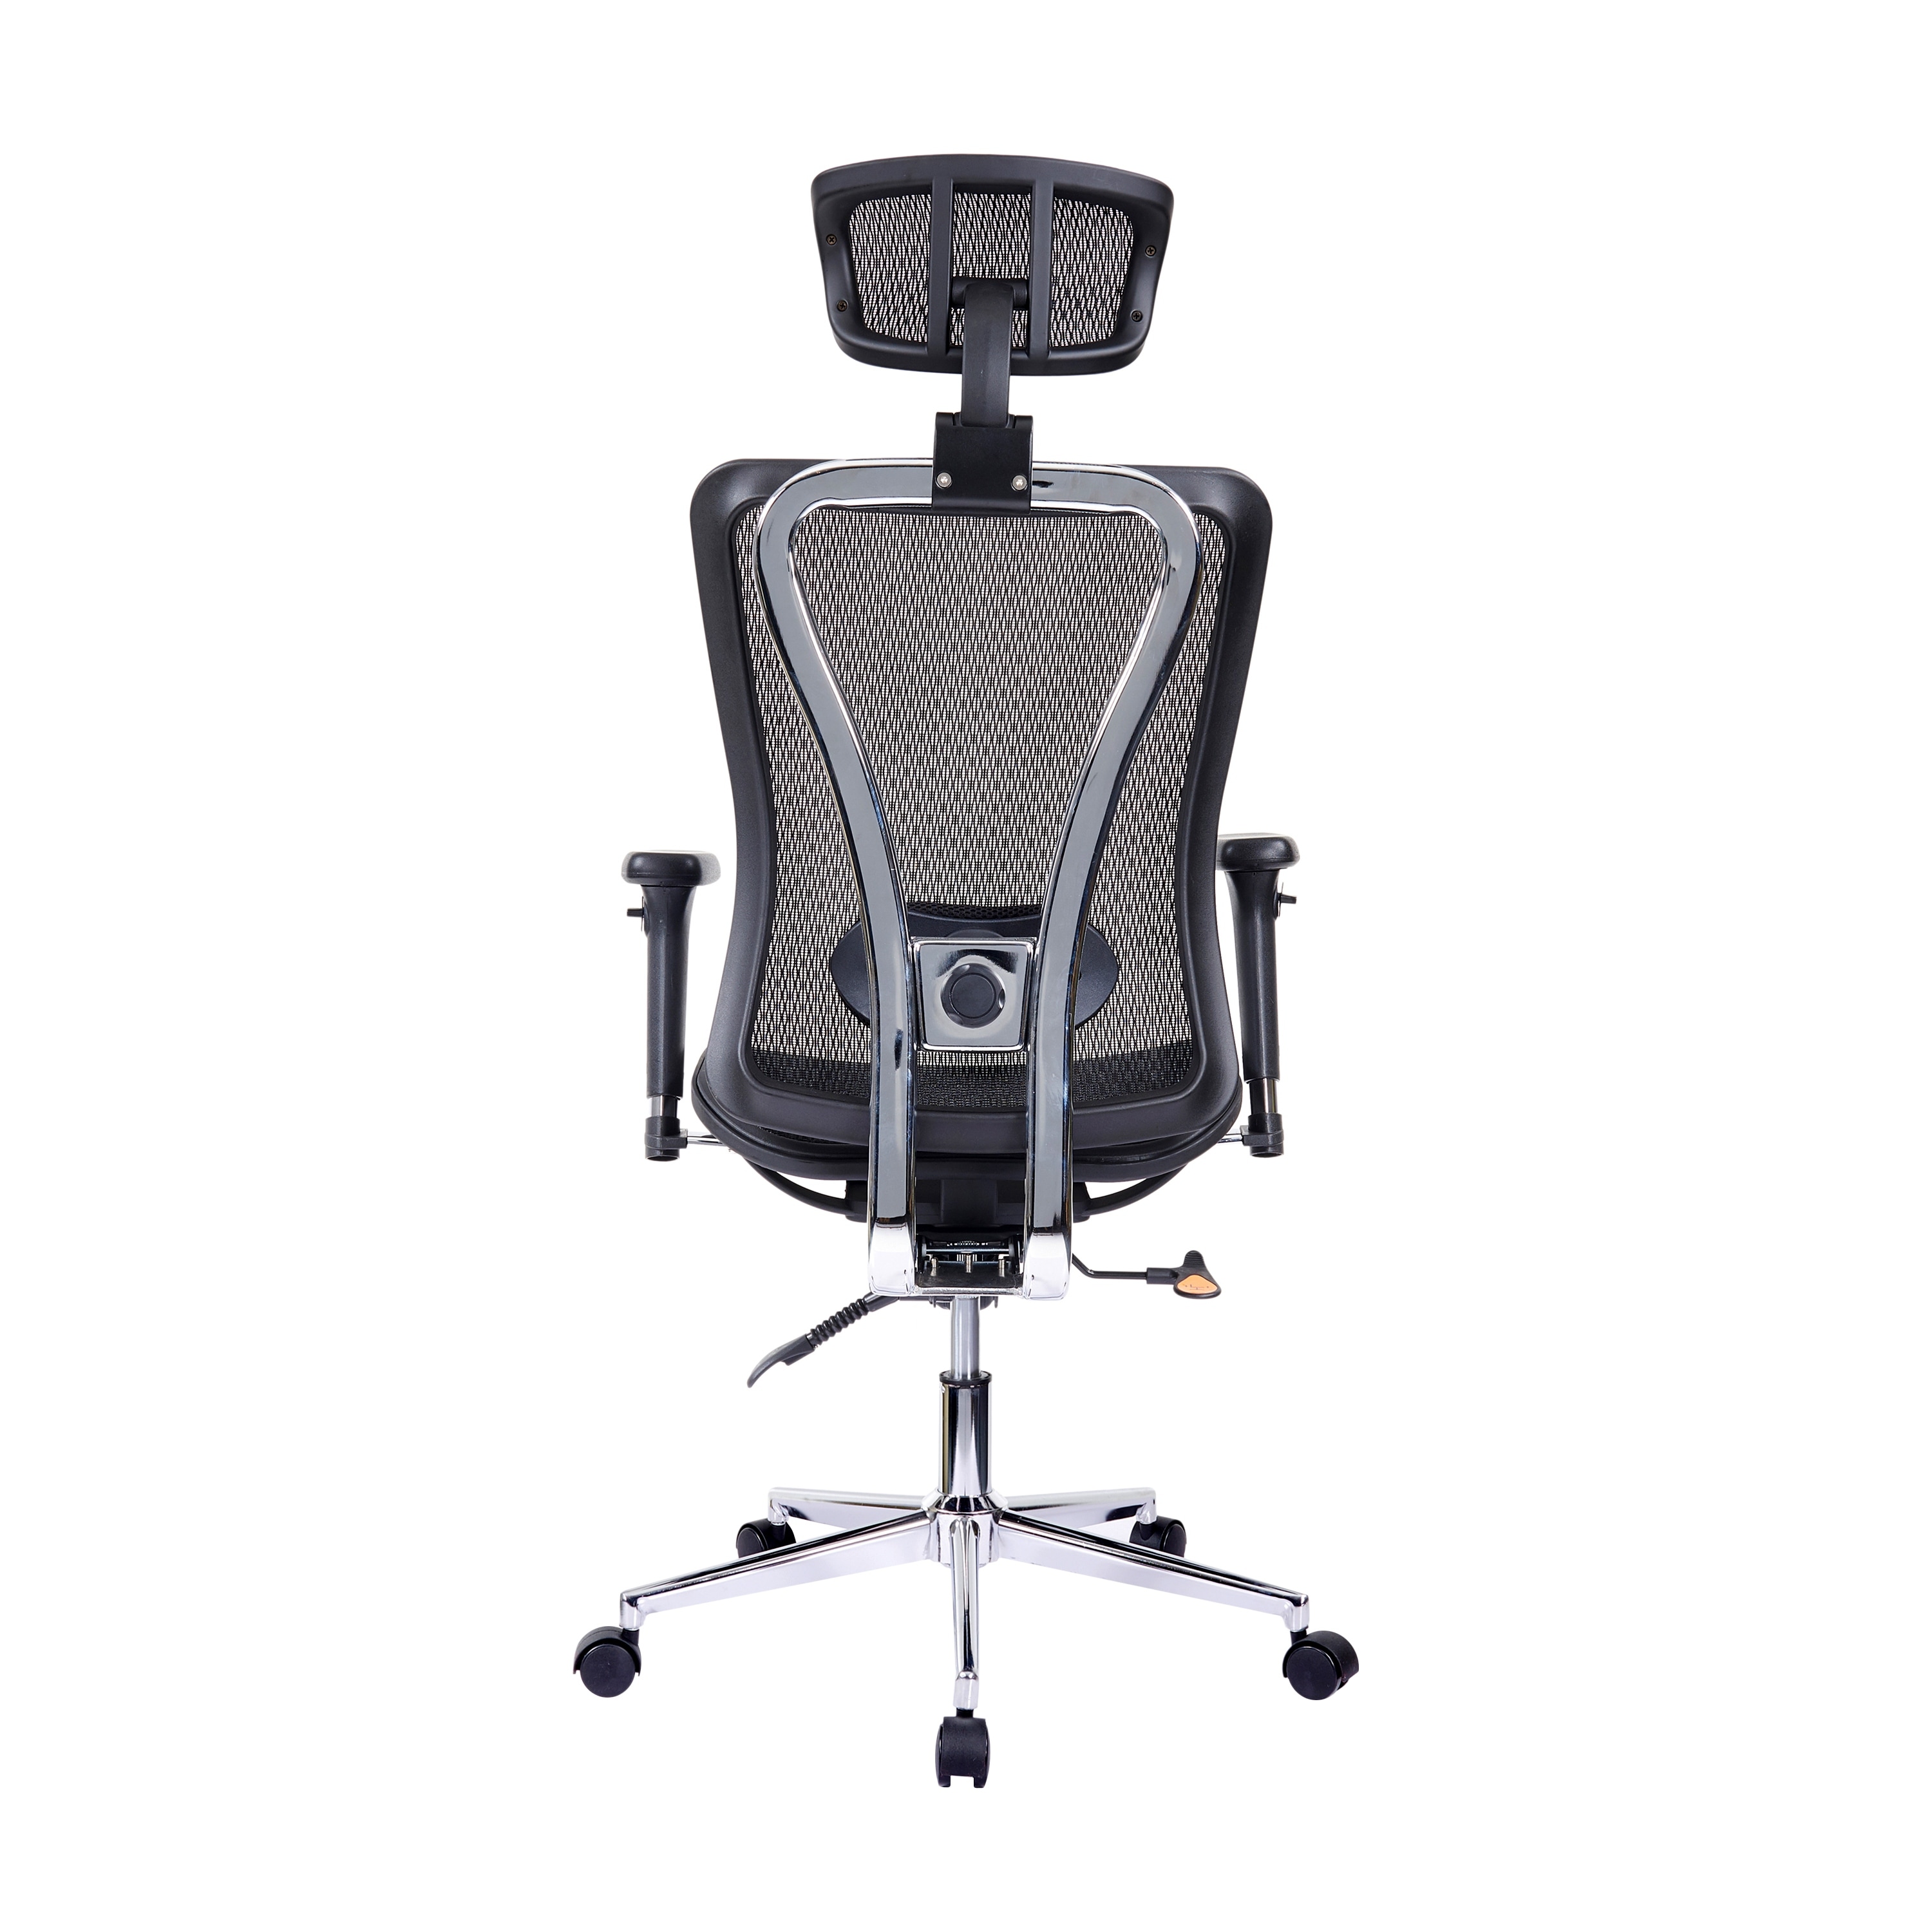 Dropship High Back Office Chair With Lifting Headrest, Adjustable